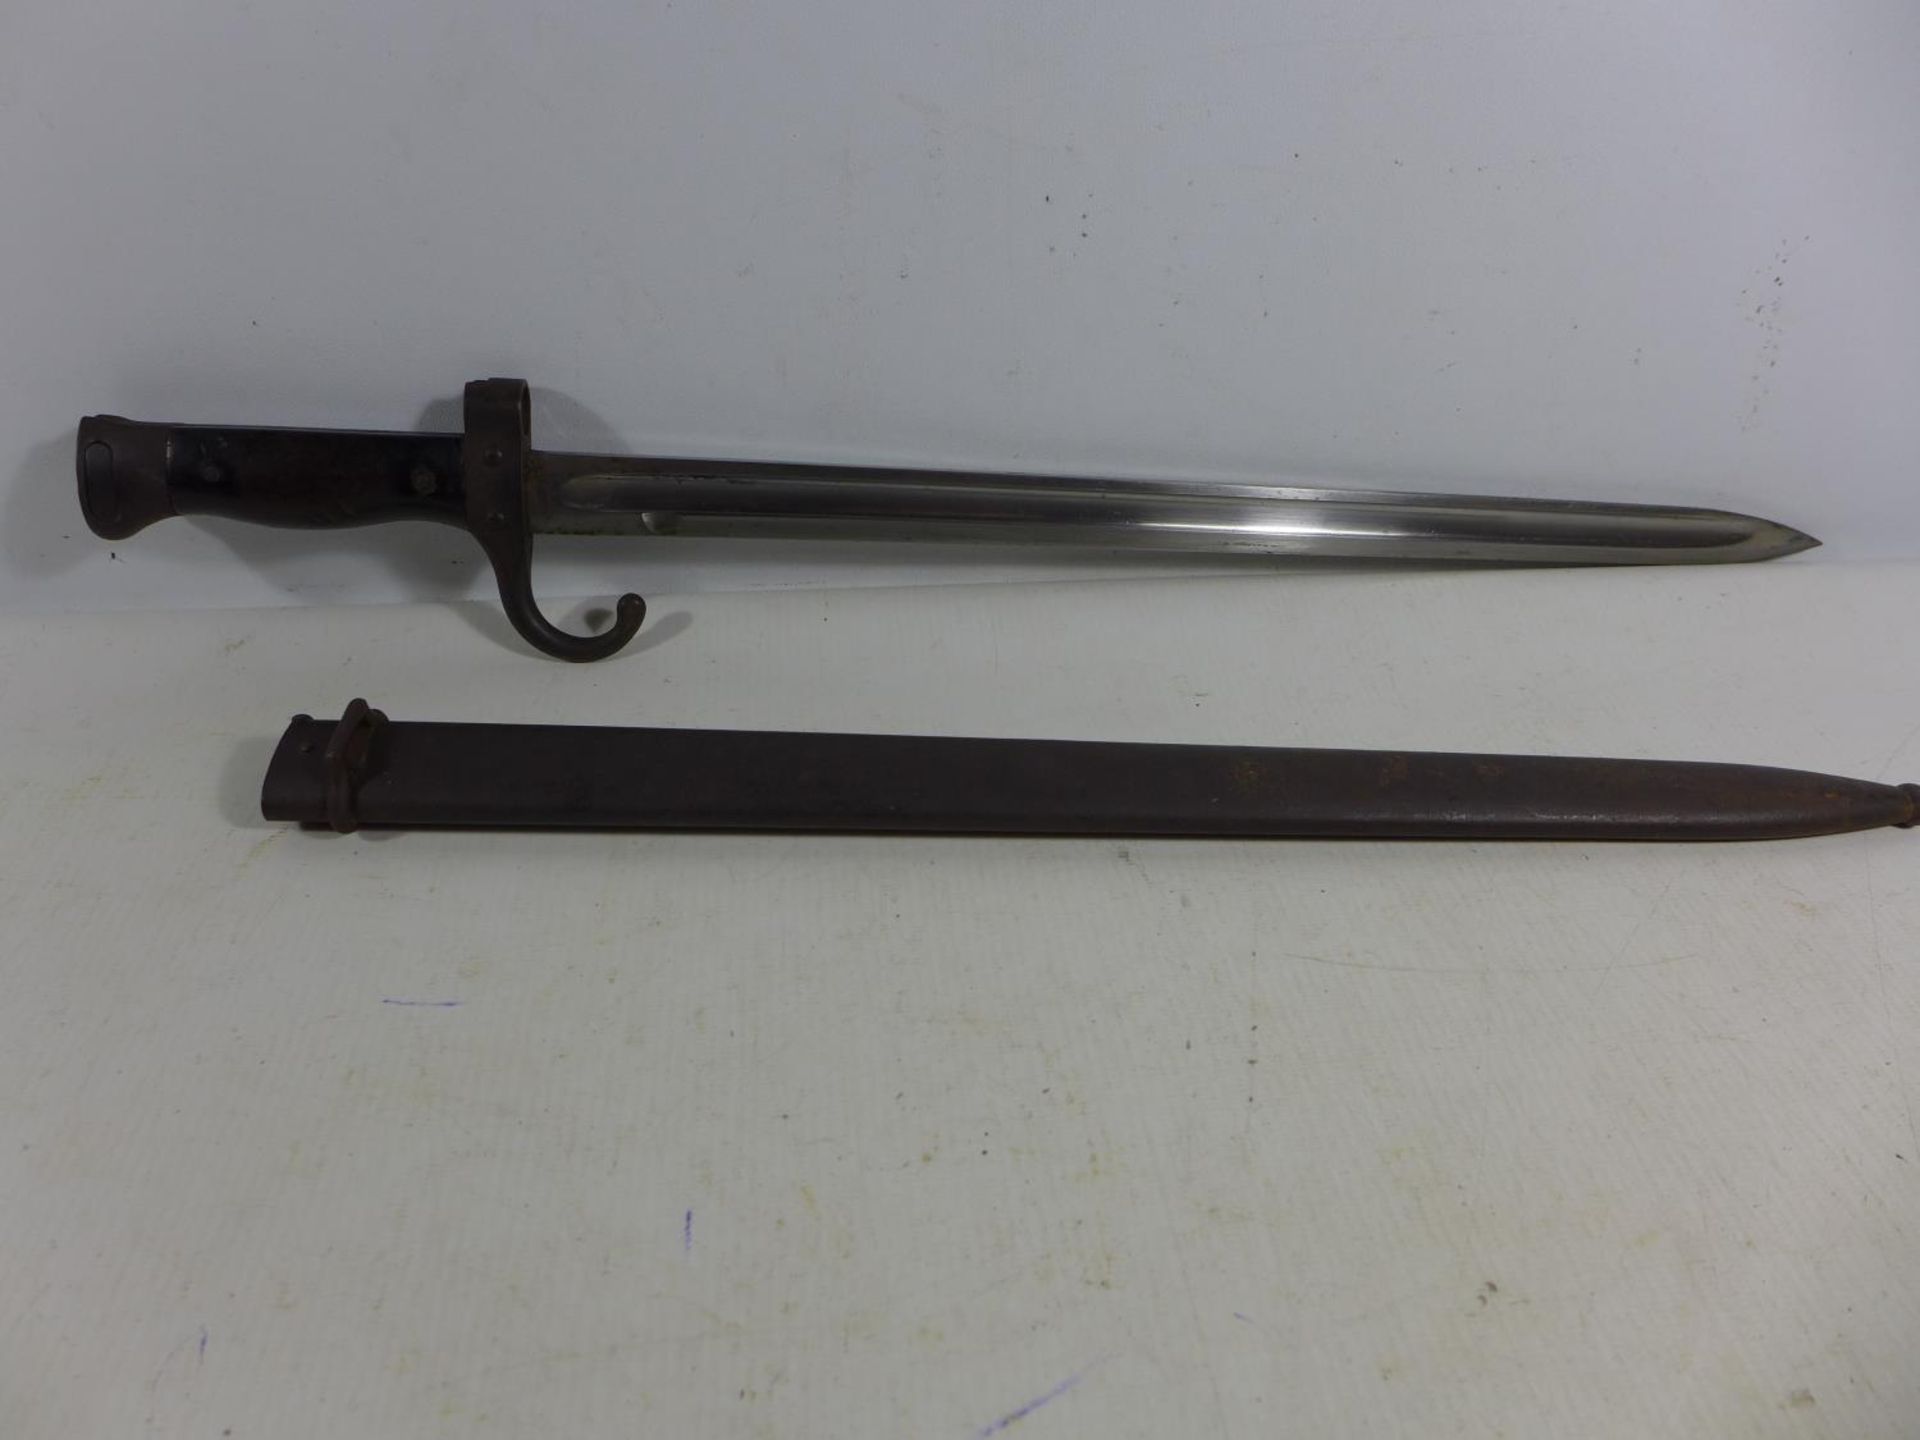 A FRENCH 1892 PATTERN BAYONET AND SCABBARD 40CM BLADE, LENGTH 54CM